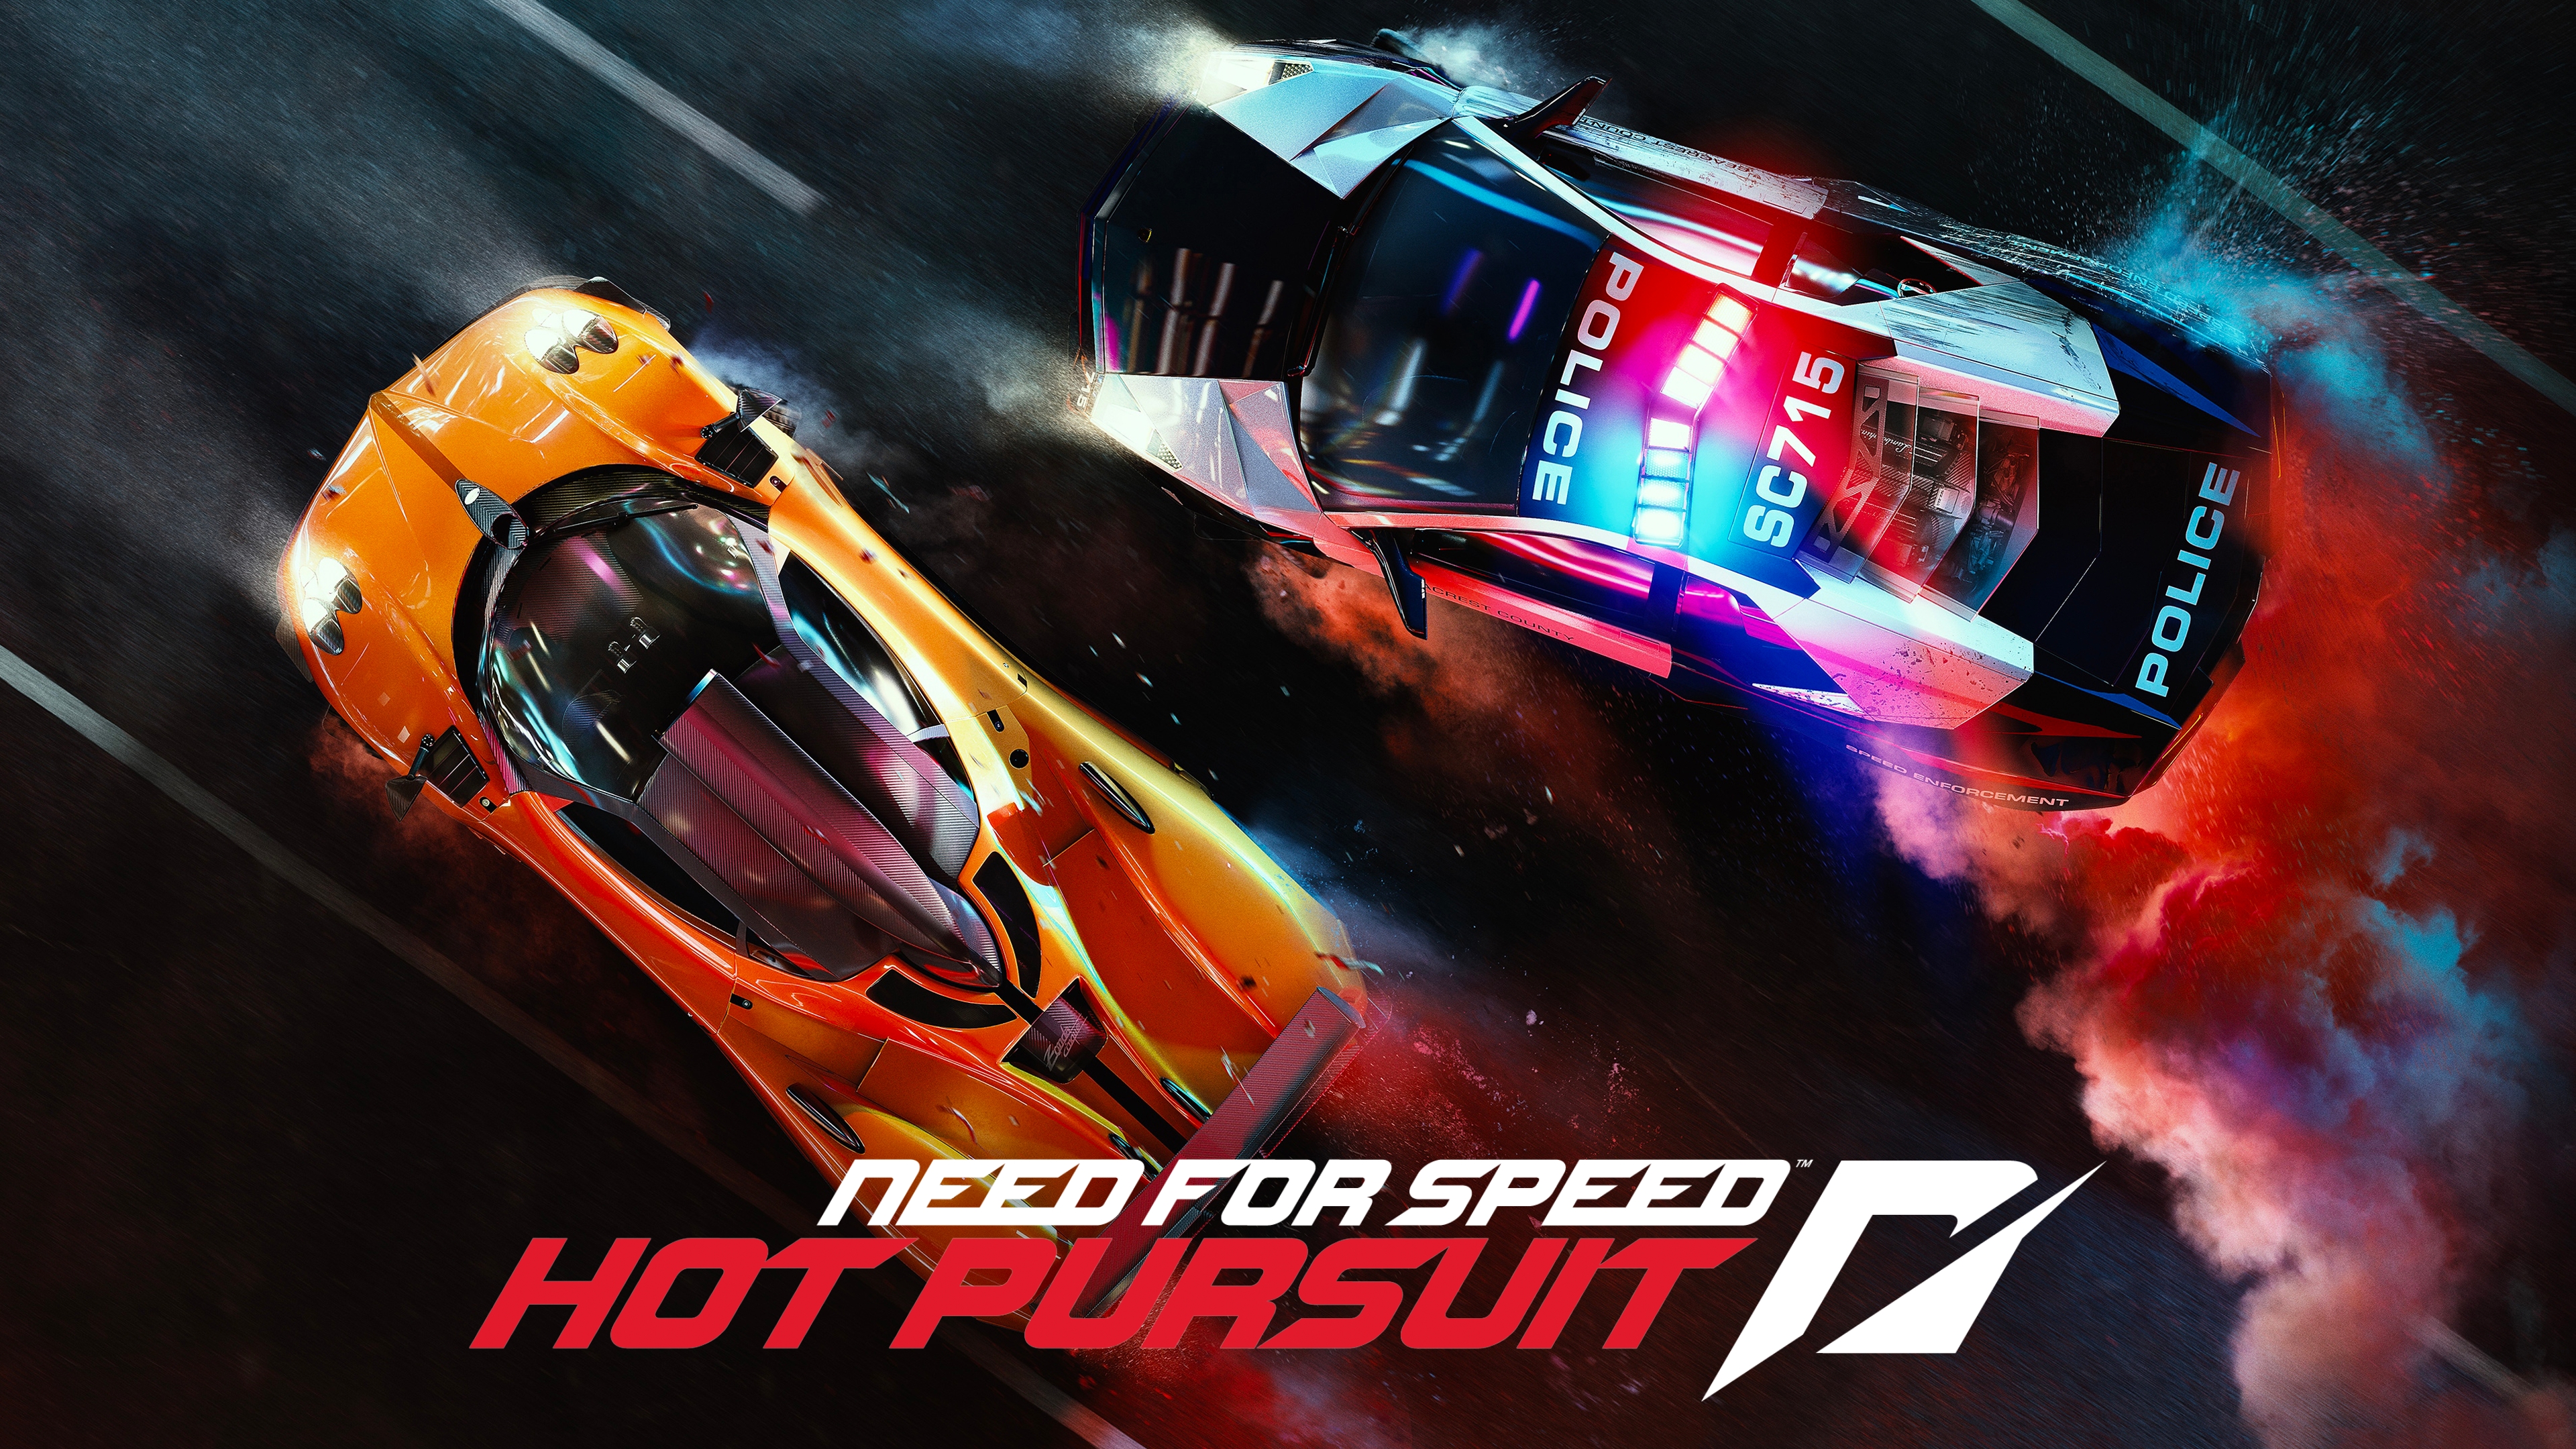 Buy Need For Speed: Hot Pursuit Remastered